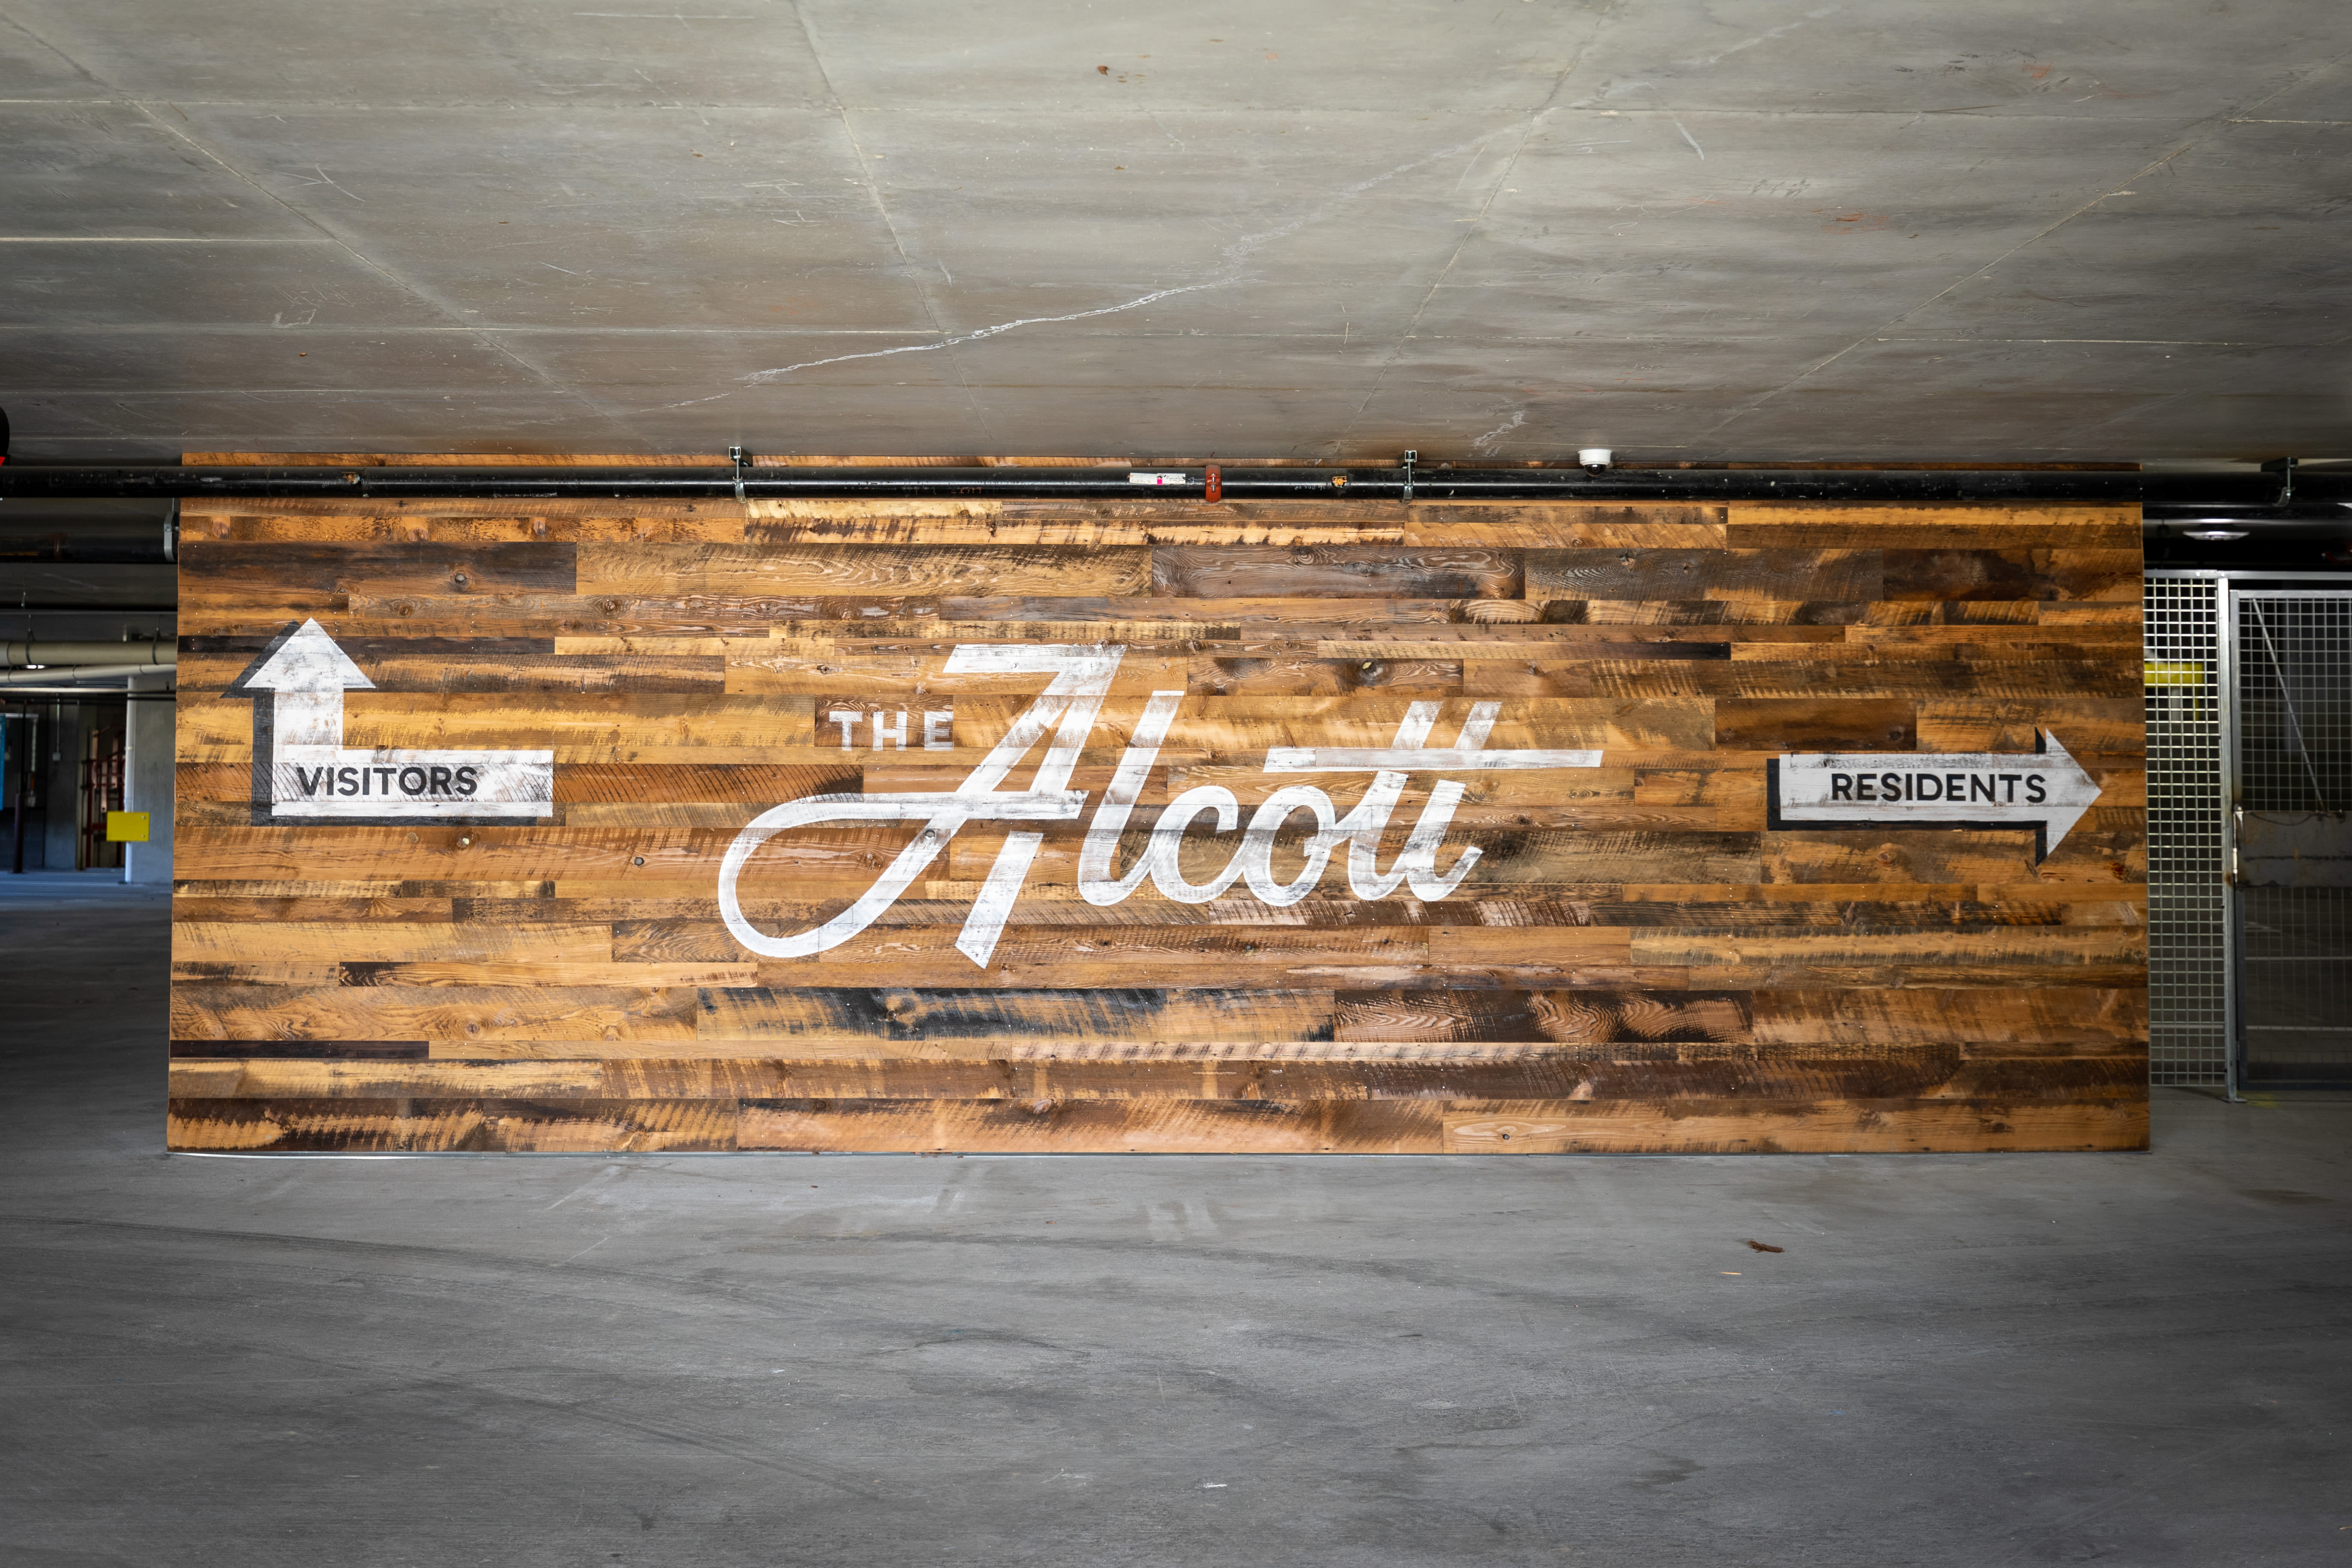 The Alcott sign on wood in Downtown Denver, Colorado